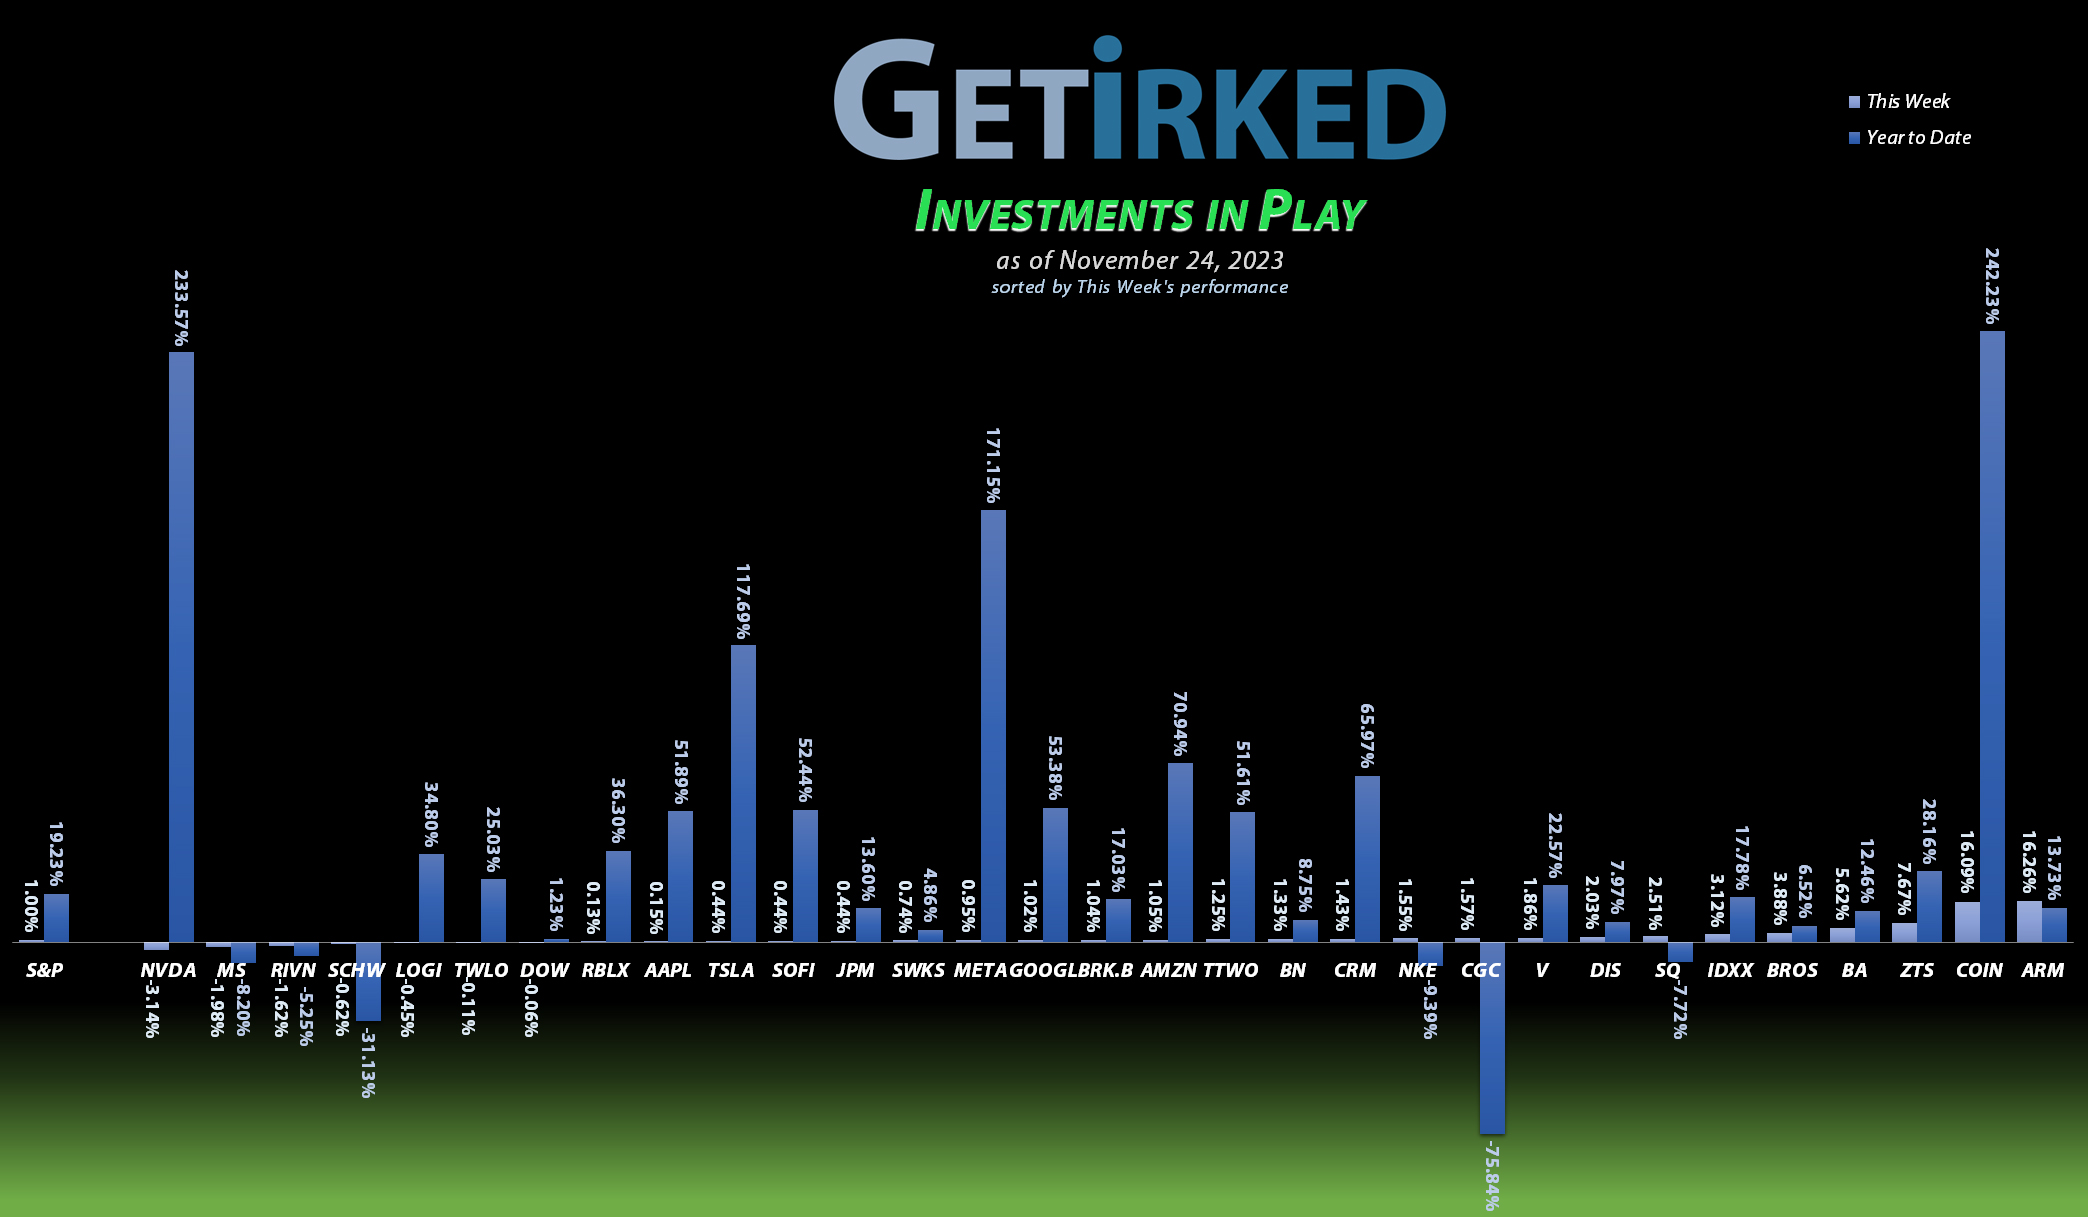 Get Irked's Investments in Play - November 24, 2023